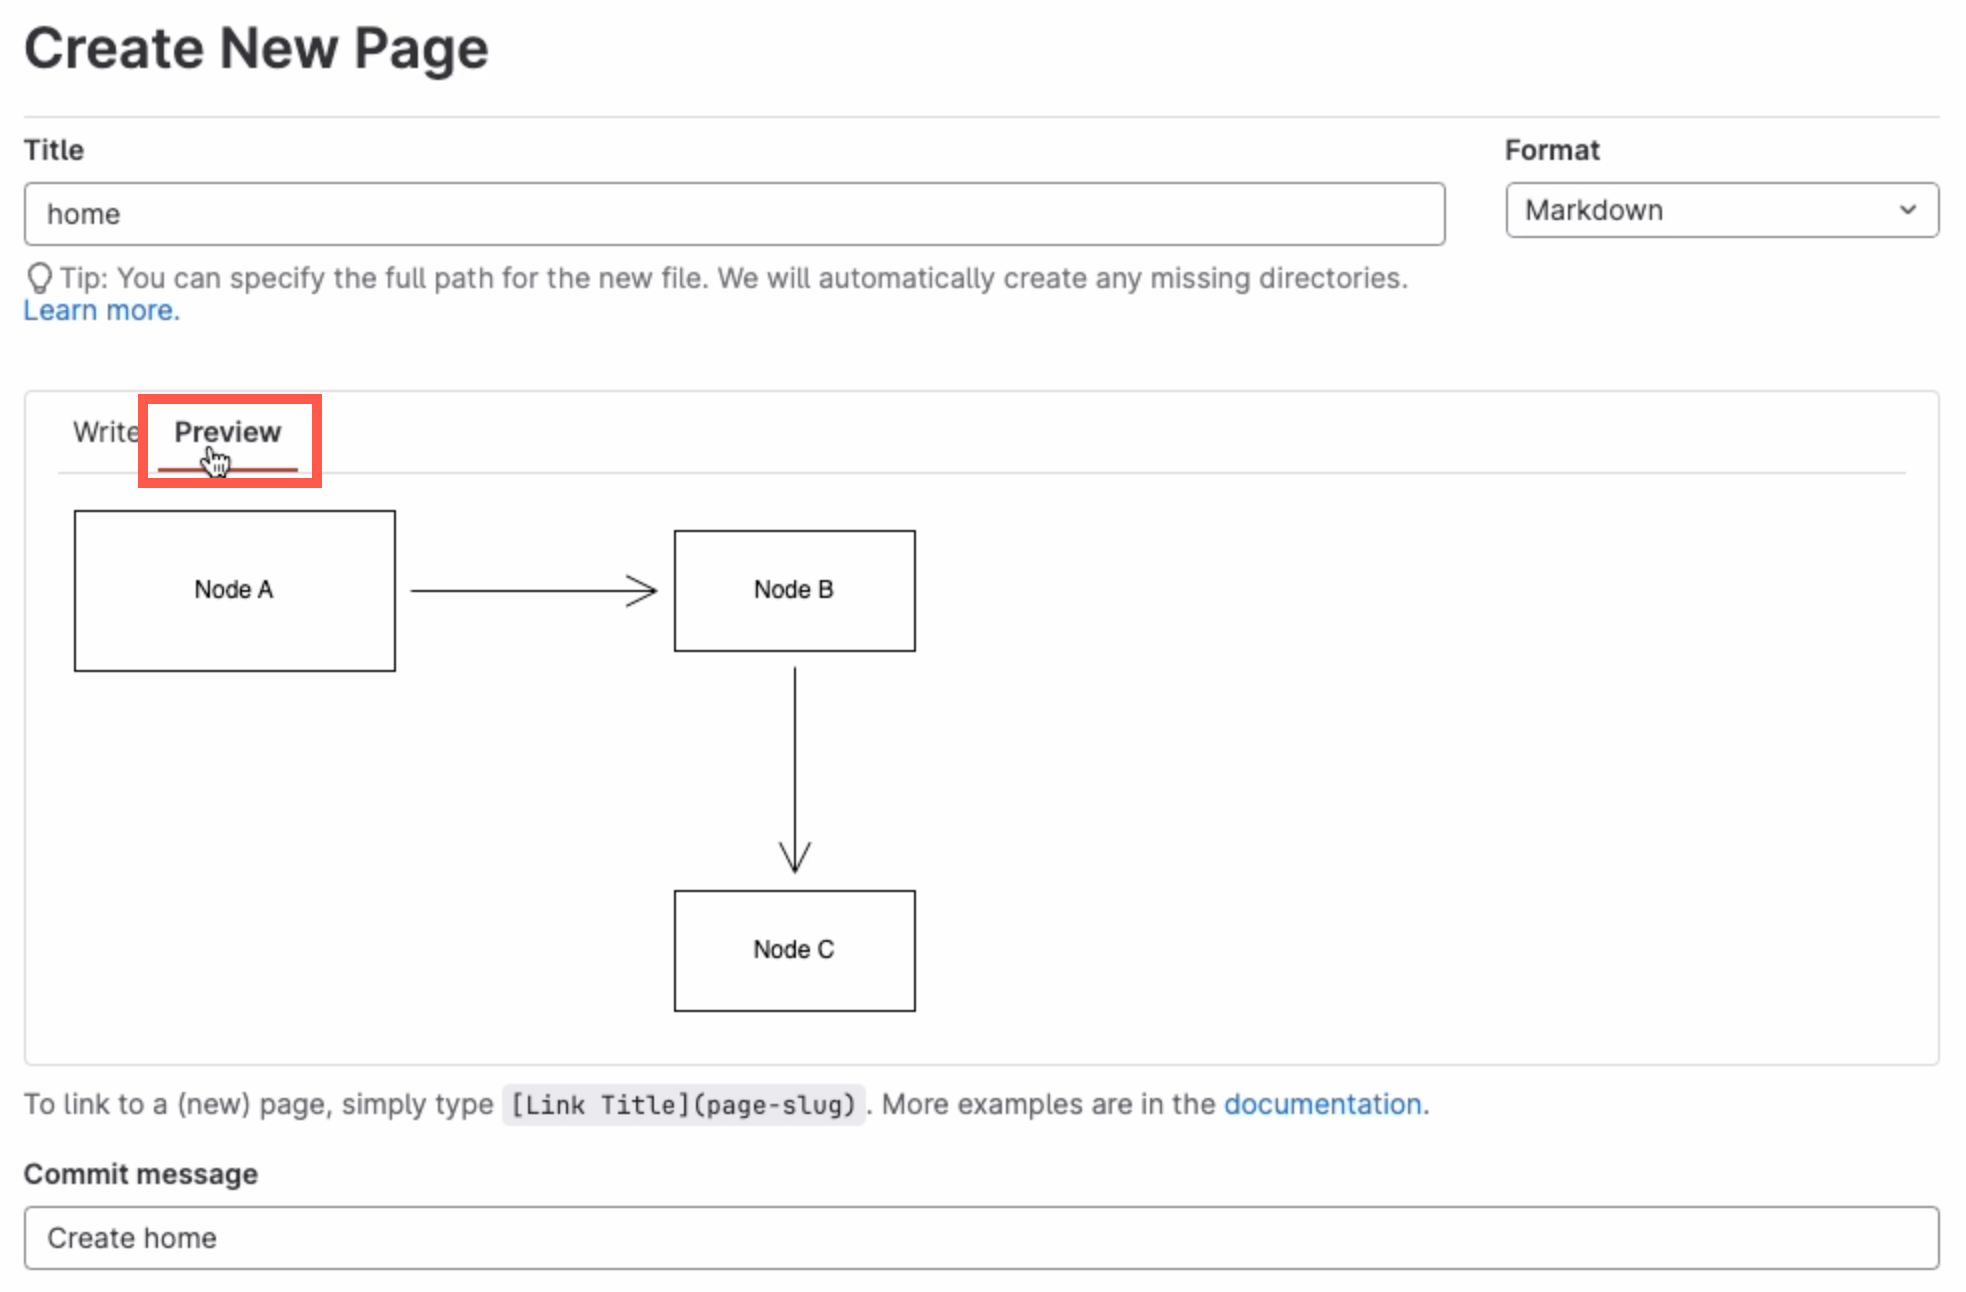 Preview the page to see how the diagram is rendered along with the markdown text content of the GitLab Wiki page